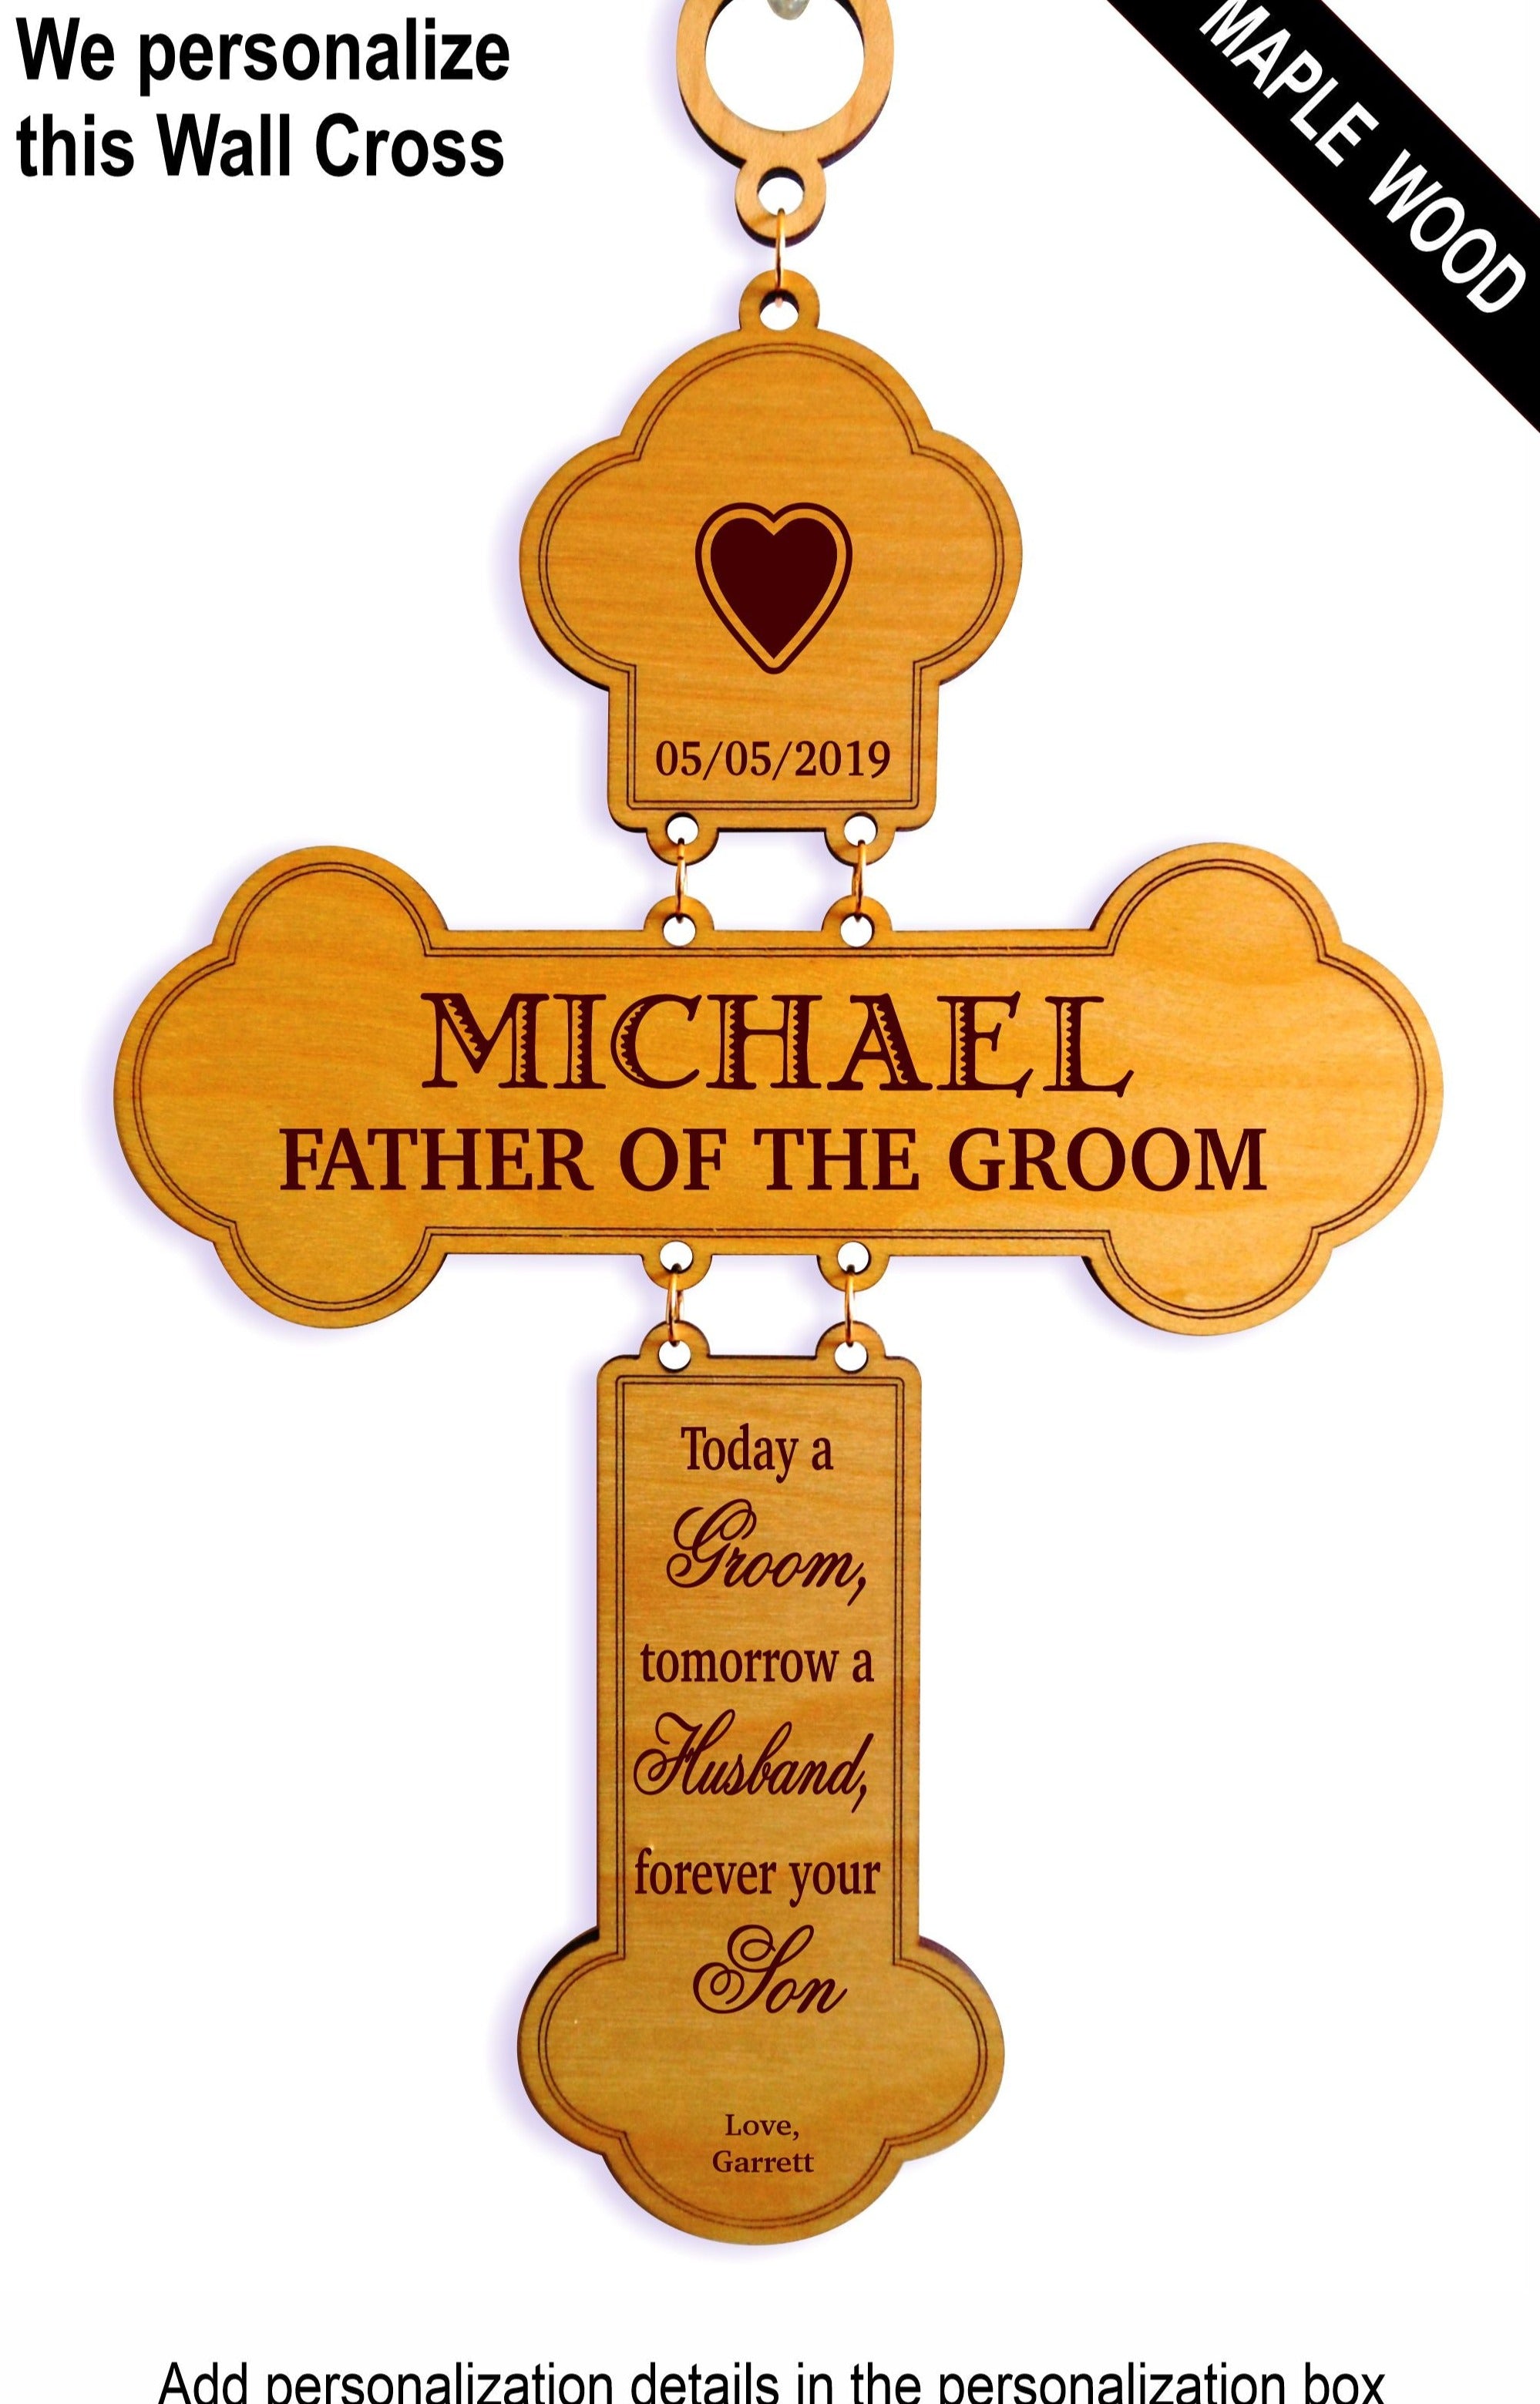 Father of the Groom Gift Dad Wedding Personalized Wood Wall Cross GGFOG1